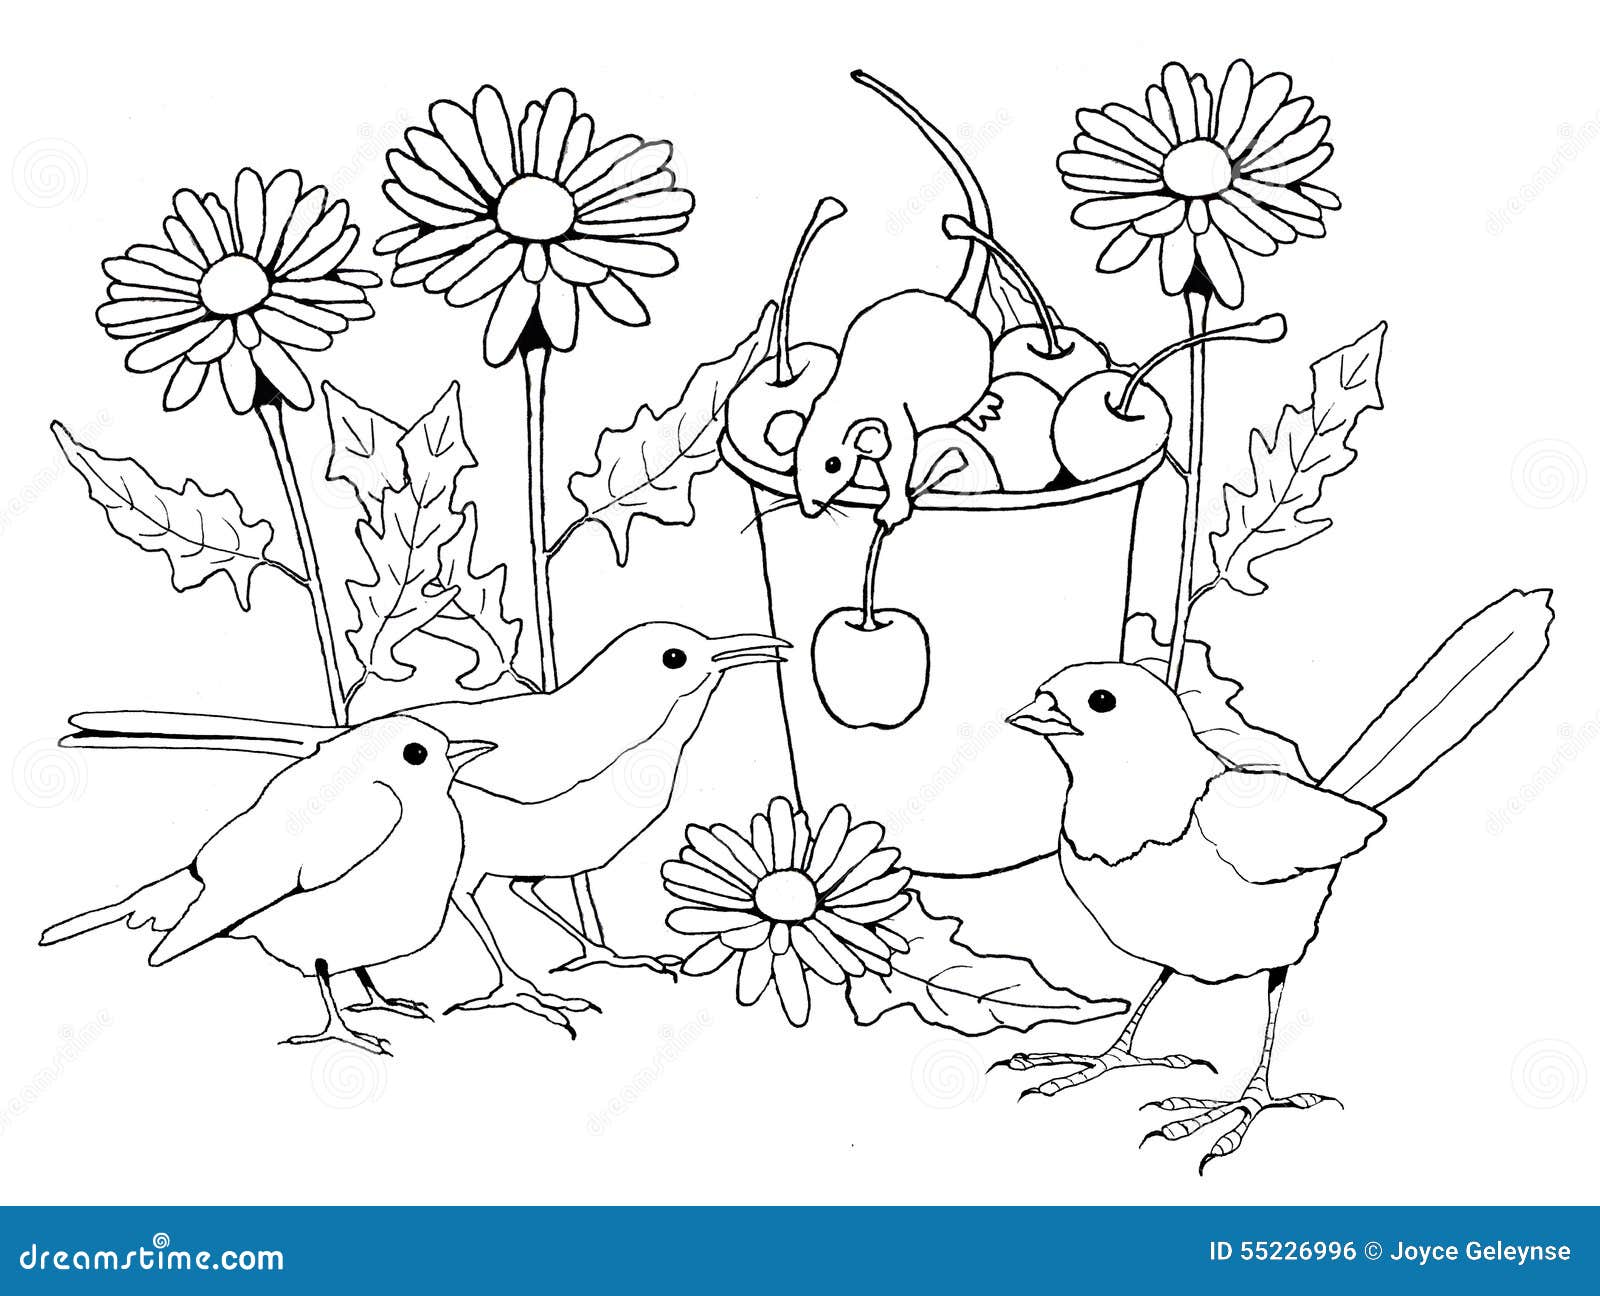 Birds And Mice With Flowers, Coloring Page Stock ...